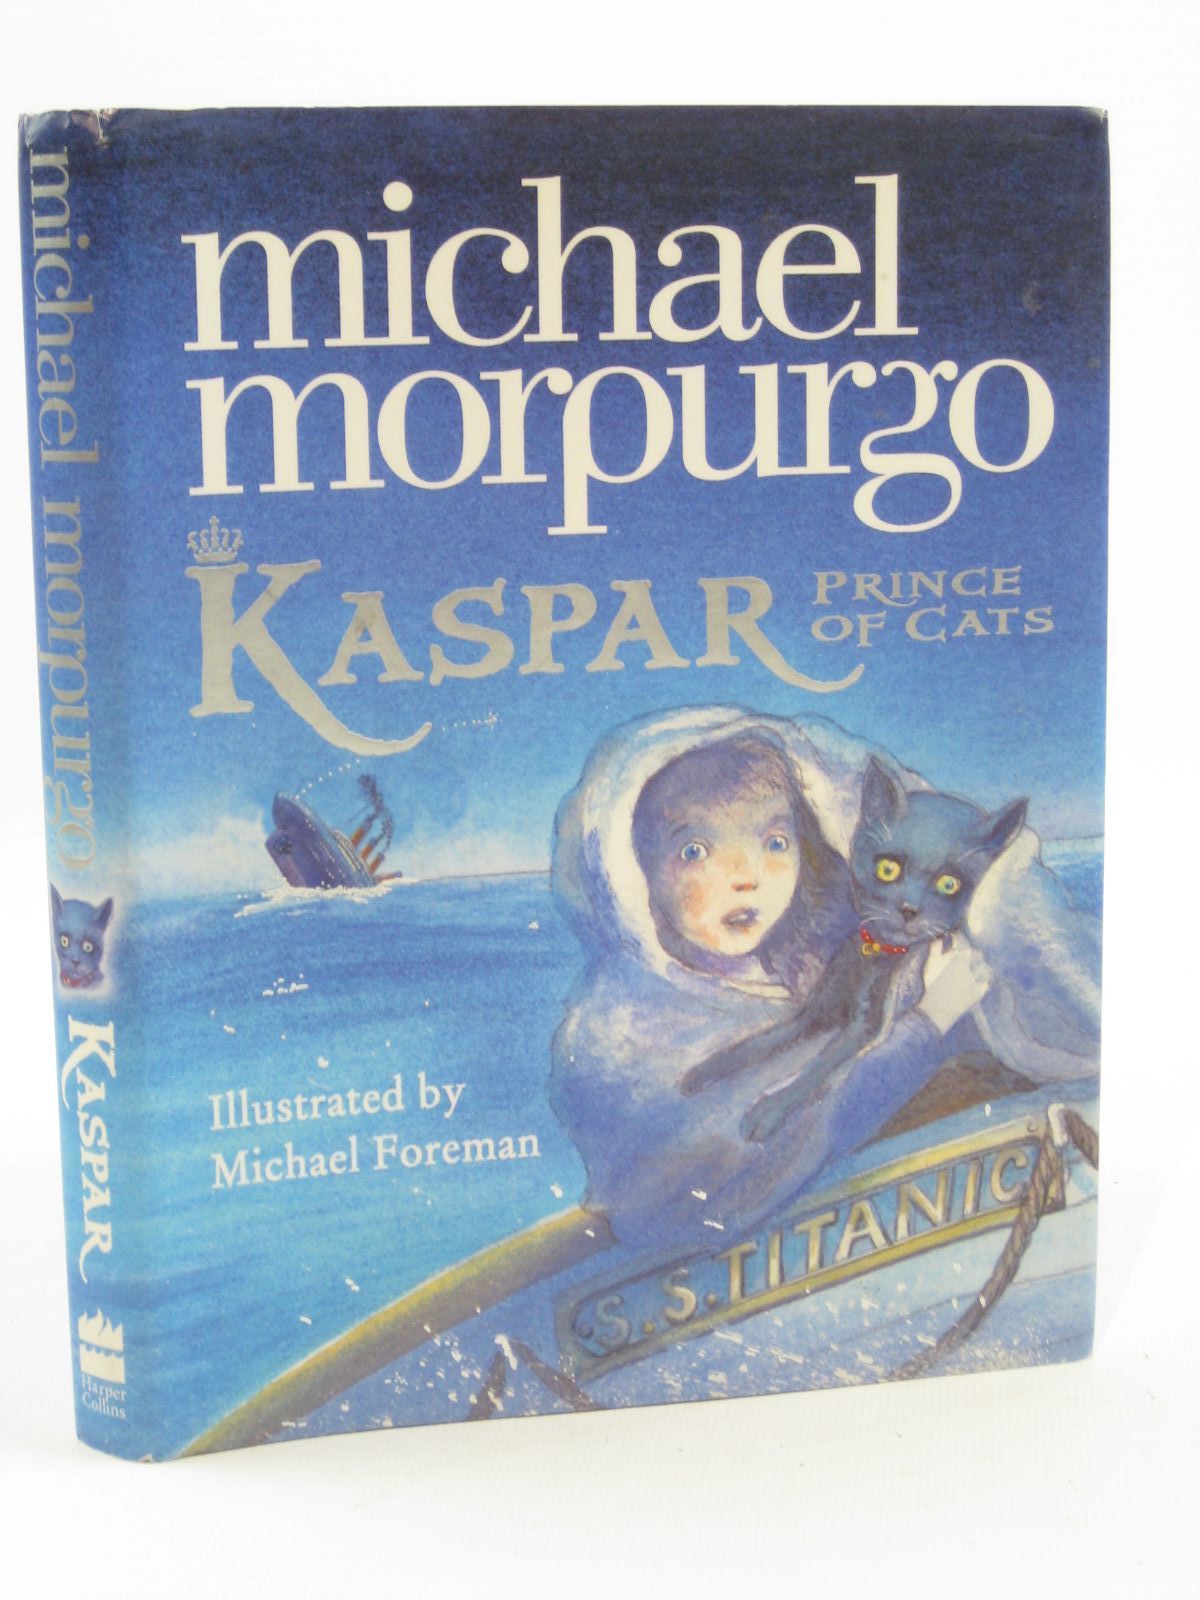 Photo of KASPAR PRINCE OF CATS written by Morpurgo, Michael illustrated by Foreman, Michael published by Harper Collins (STOCK CODE: 1407118)  for sale by Stella & Rose's Books